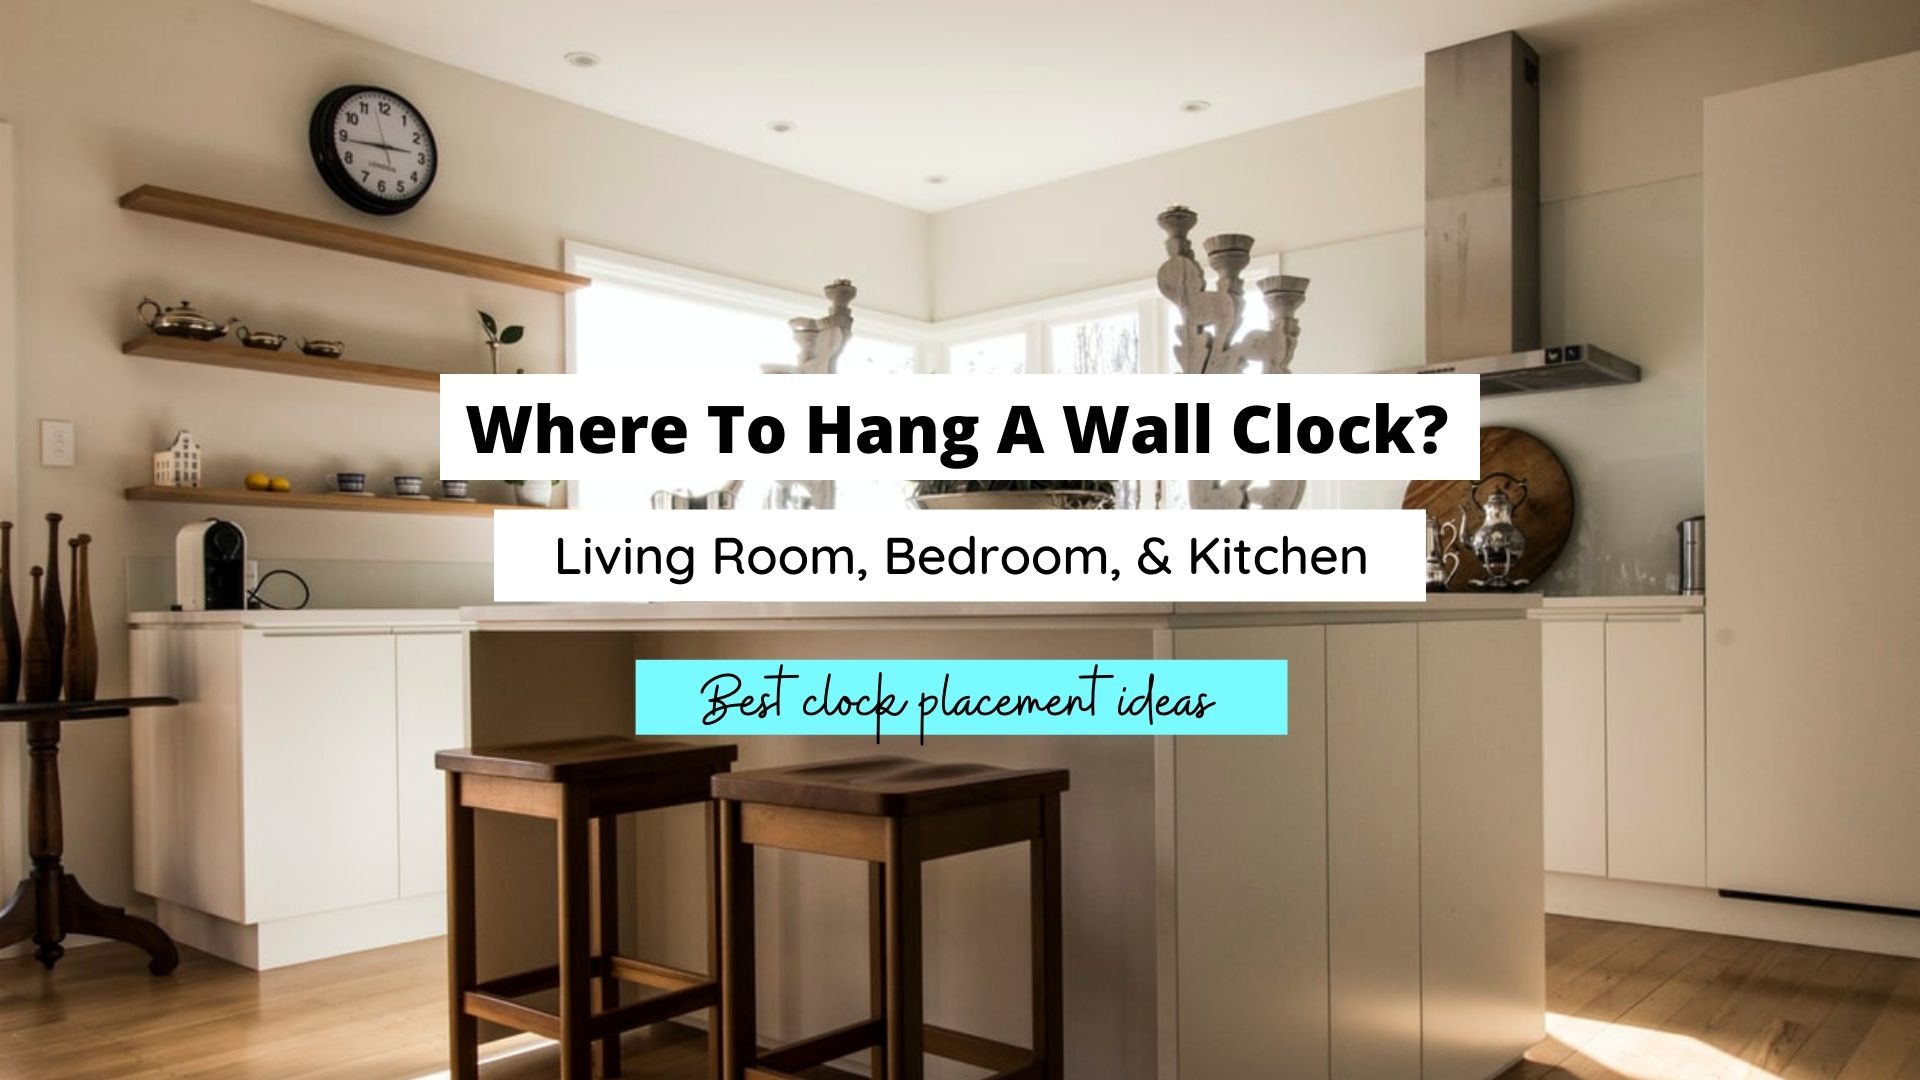 Ideaal buurman Gronden Where To Hang A Wall Clock? (Living Room, Bedroom & Kitchen Ideas)